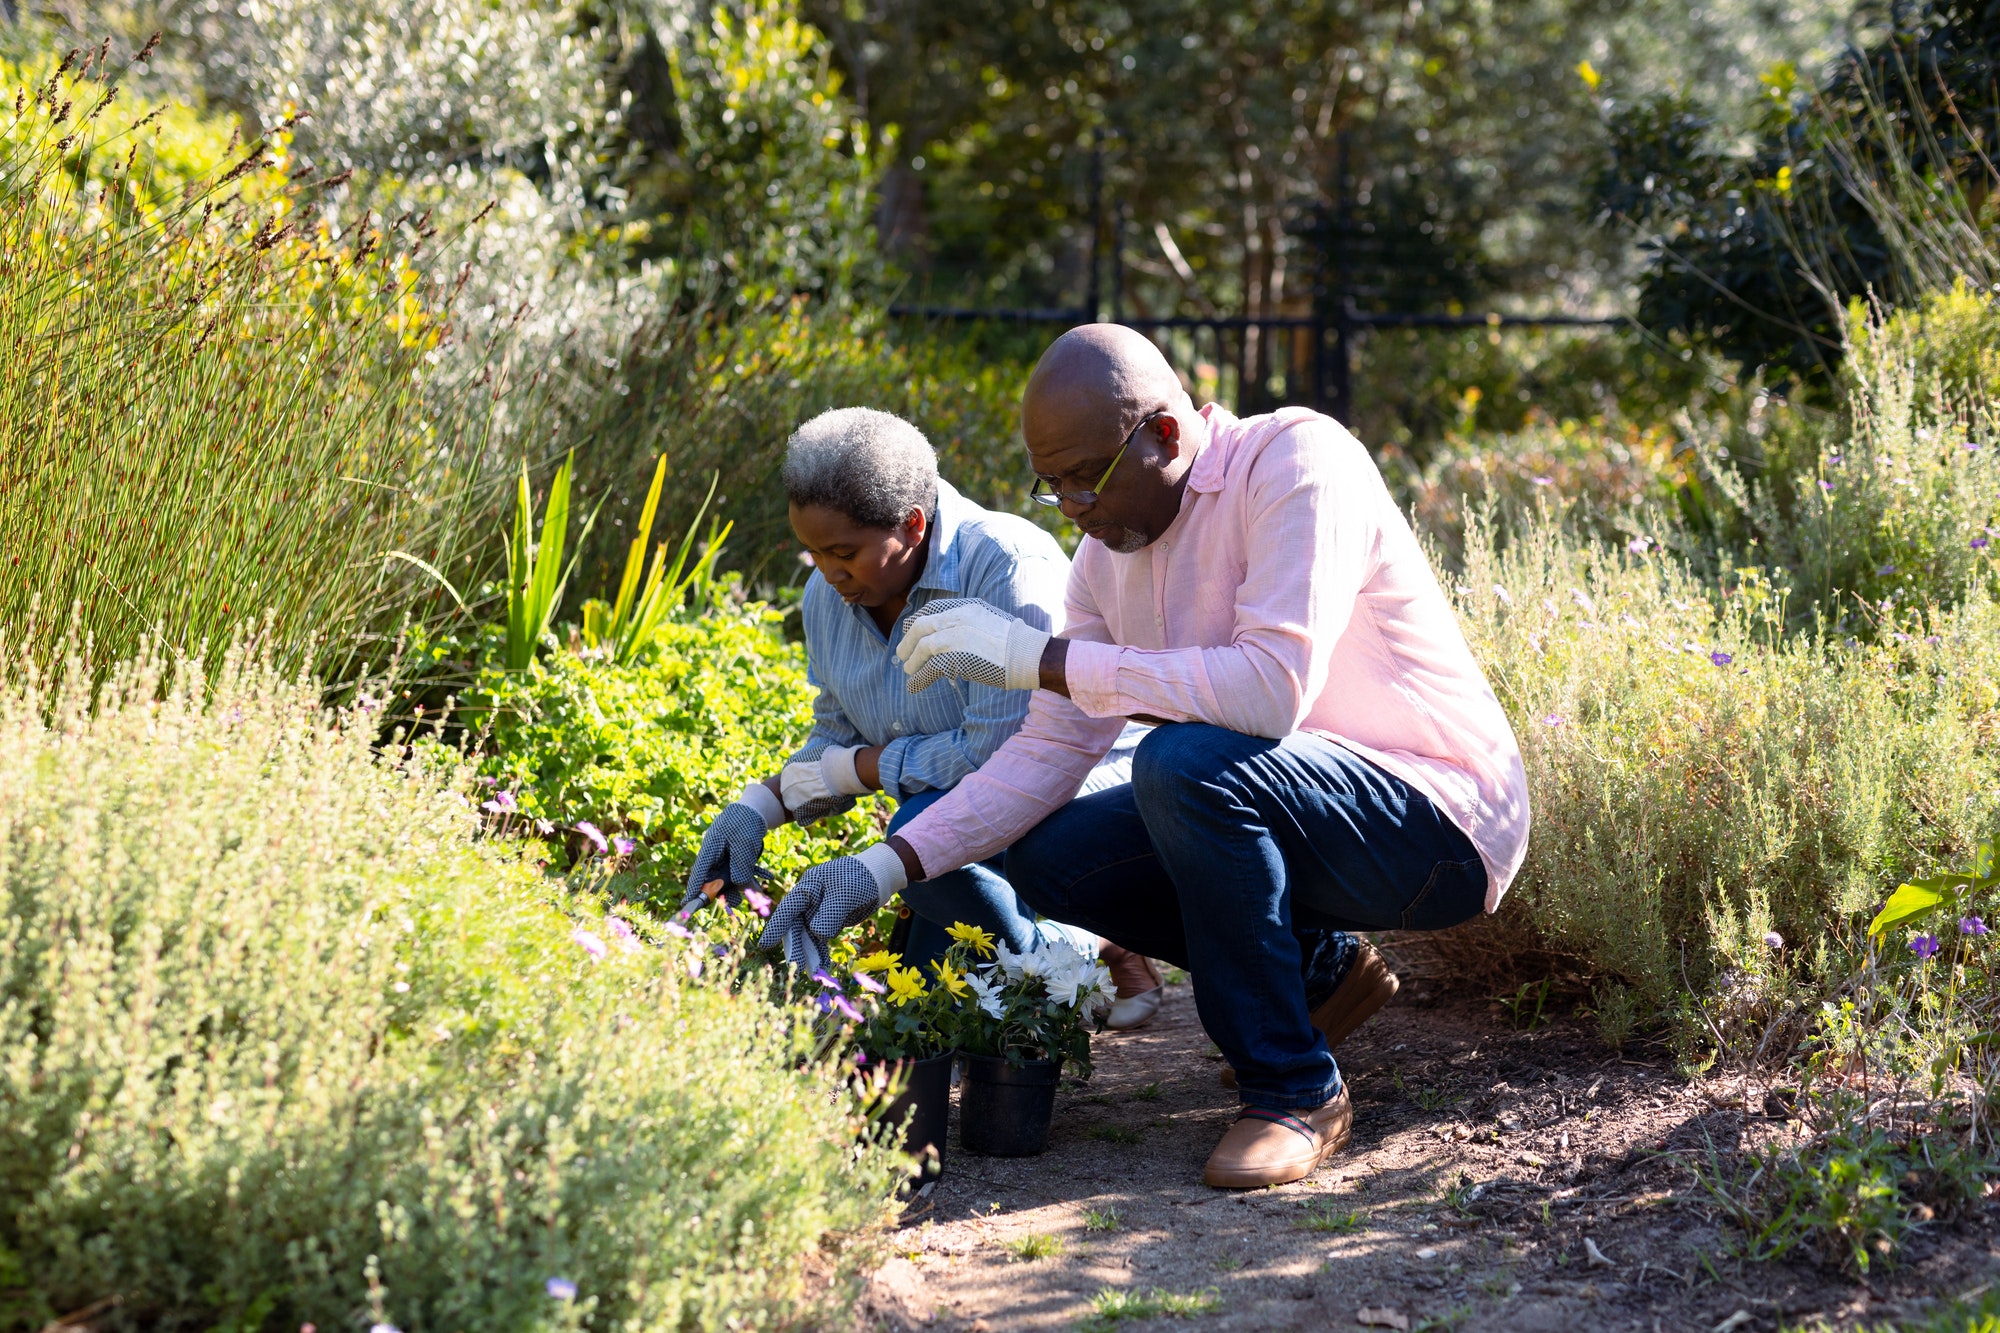 African american senior couple gardening, planting flowers outdoors